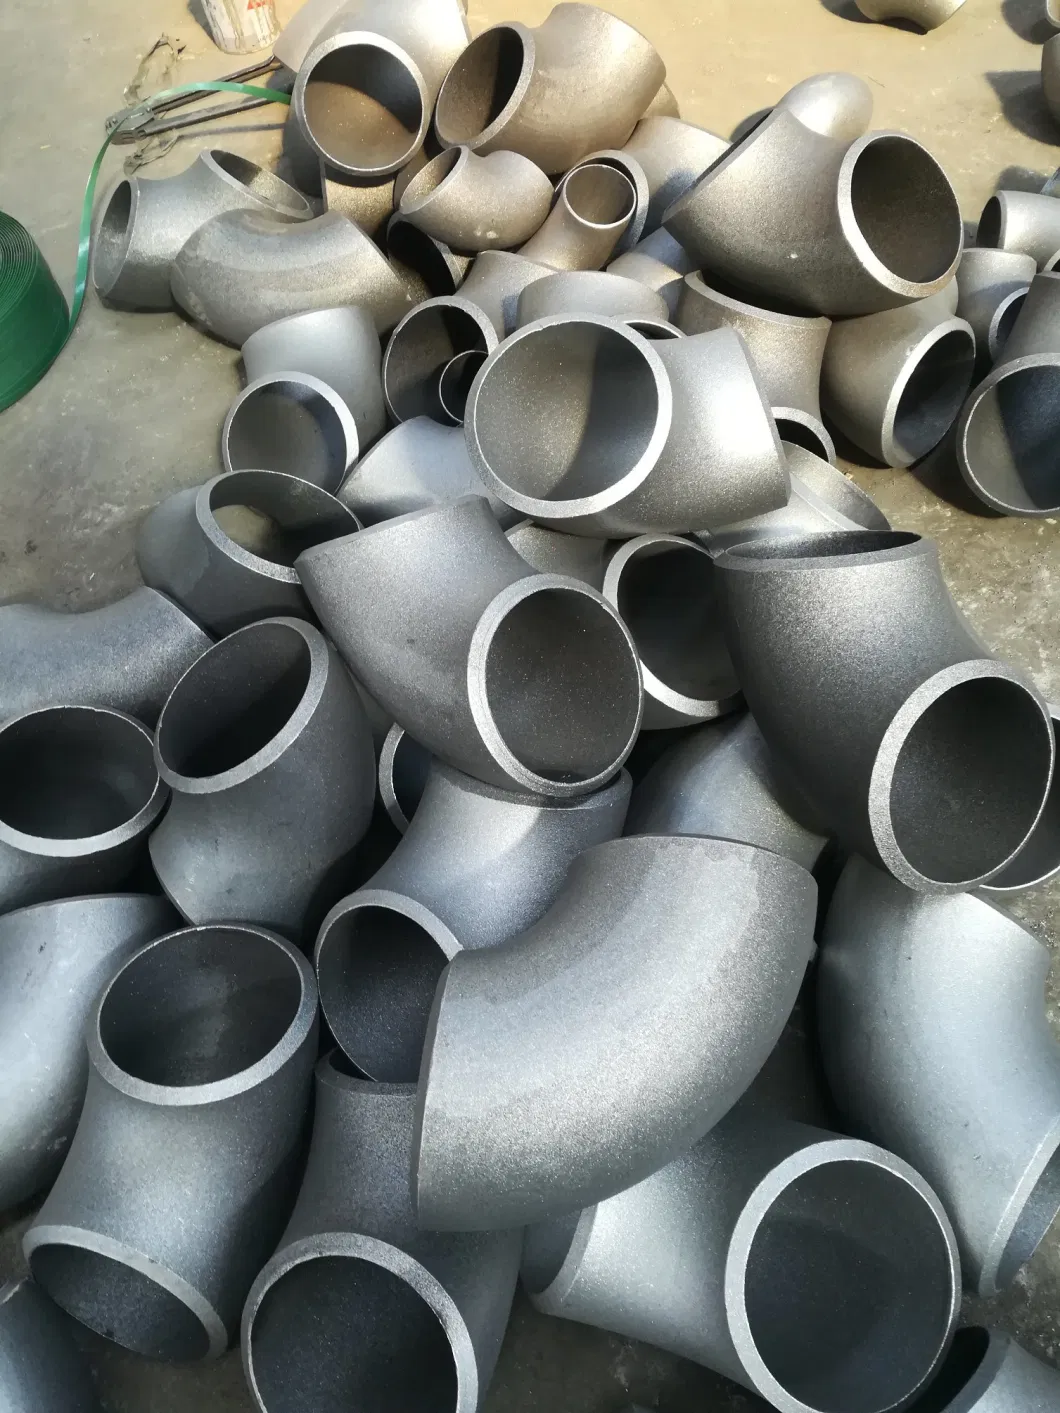 6 Inch 90 Degree Welding Carbon Steel/Stainless Steel Seamless Pipe Fitting Elbow